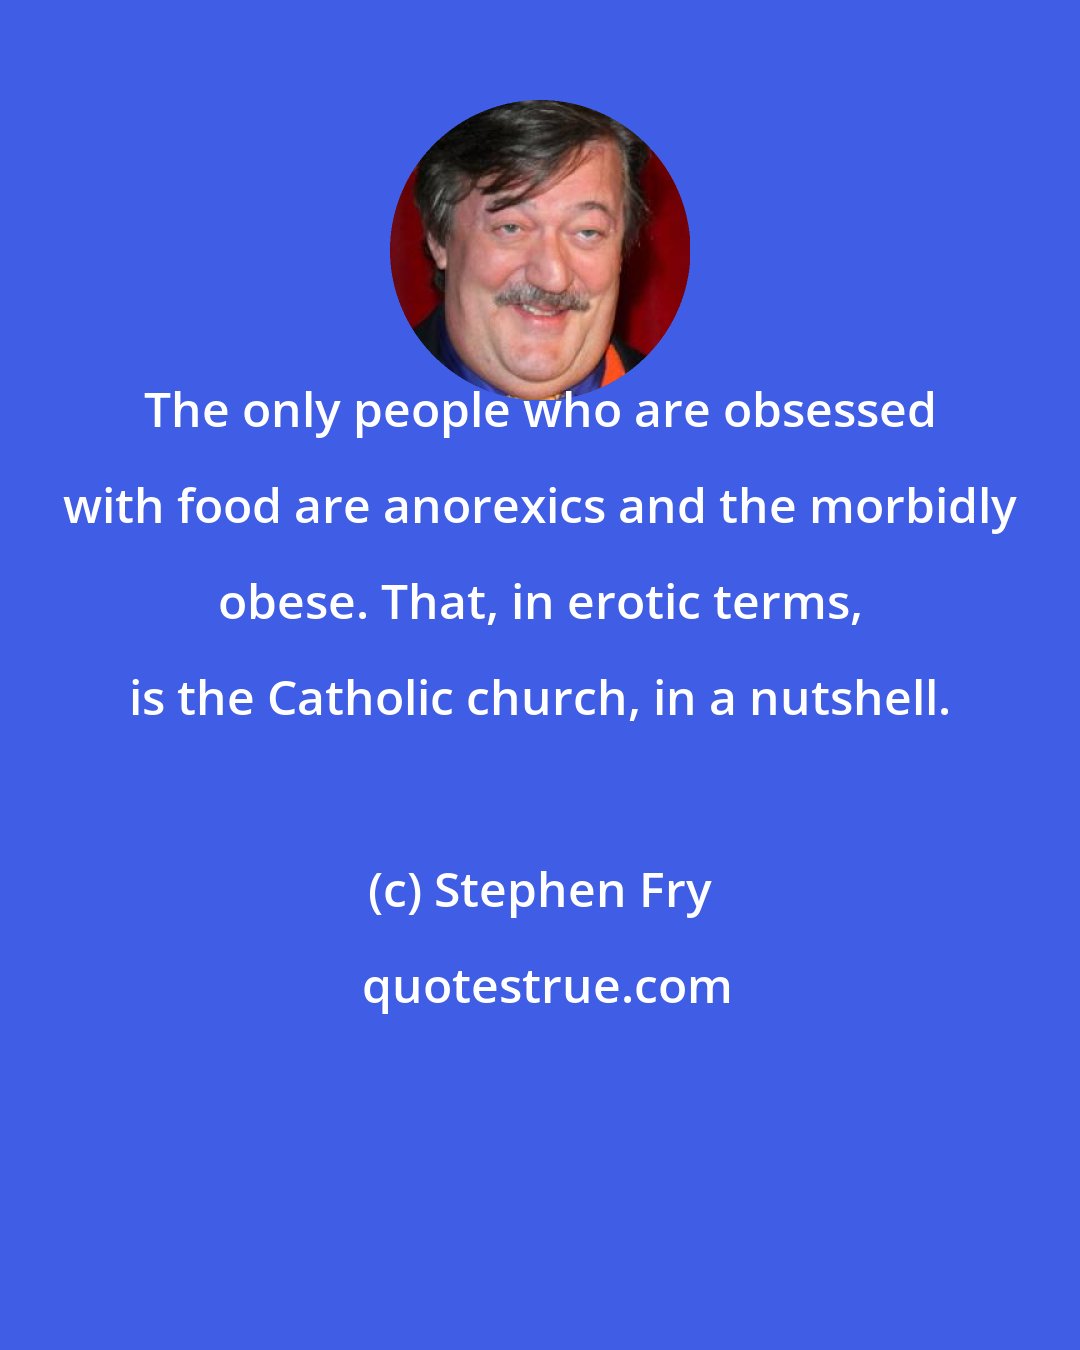 Stephen Fry: The only people who are obsessed with food are anorexics and the morbidly obese. That, in erotic terms, is the Catholic church, in a nutshell.